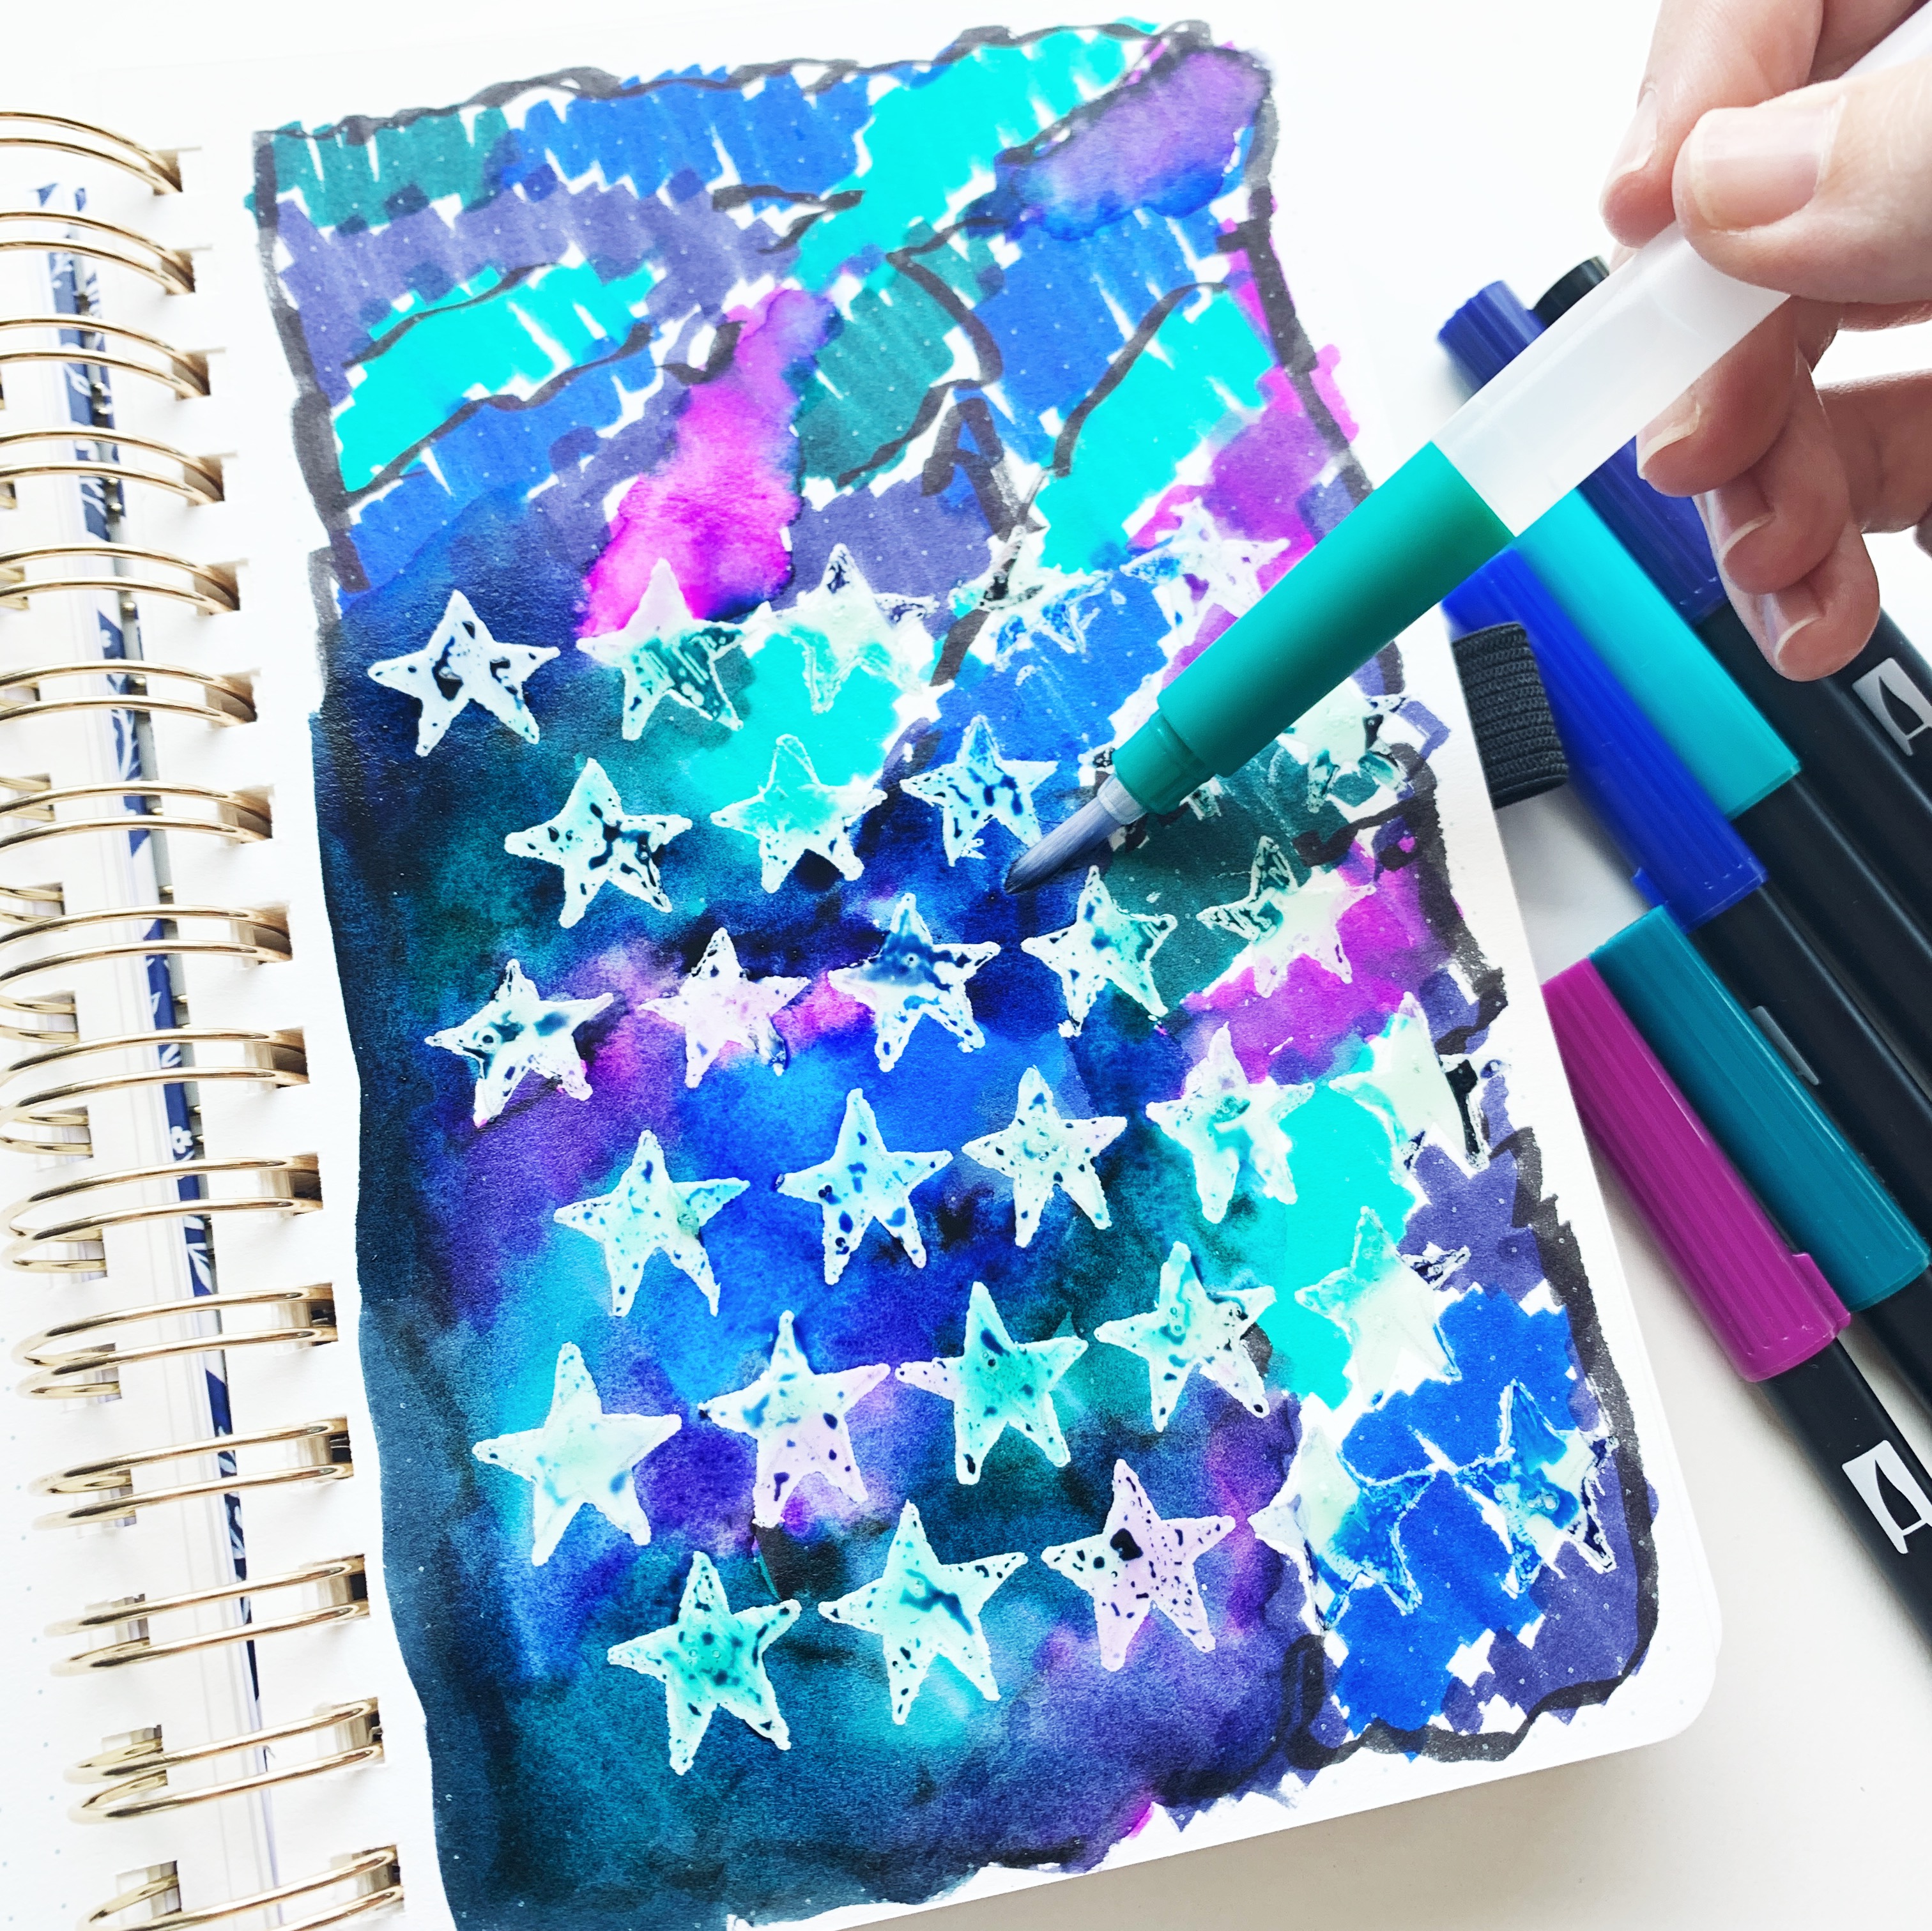 Learn how to make a horoscope watercolor habit tracker with Adrienne from @studio80design!